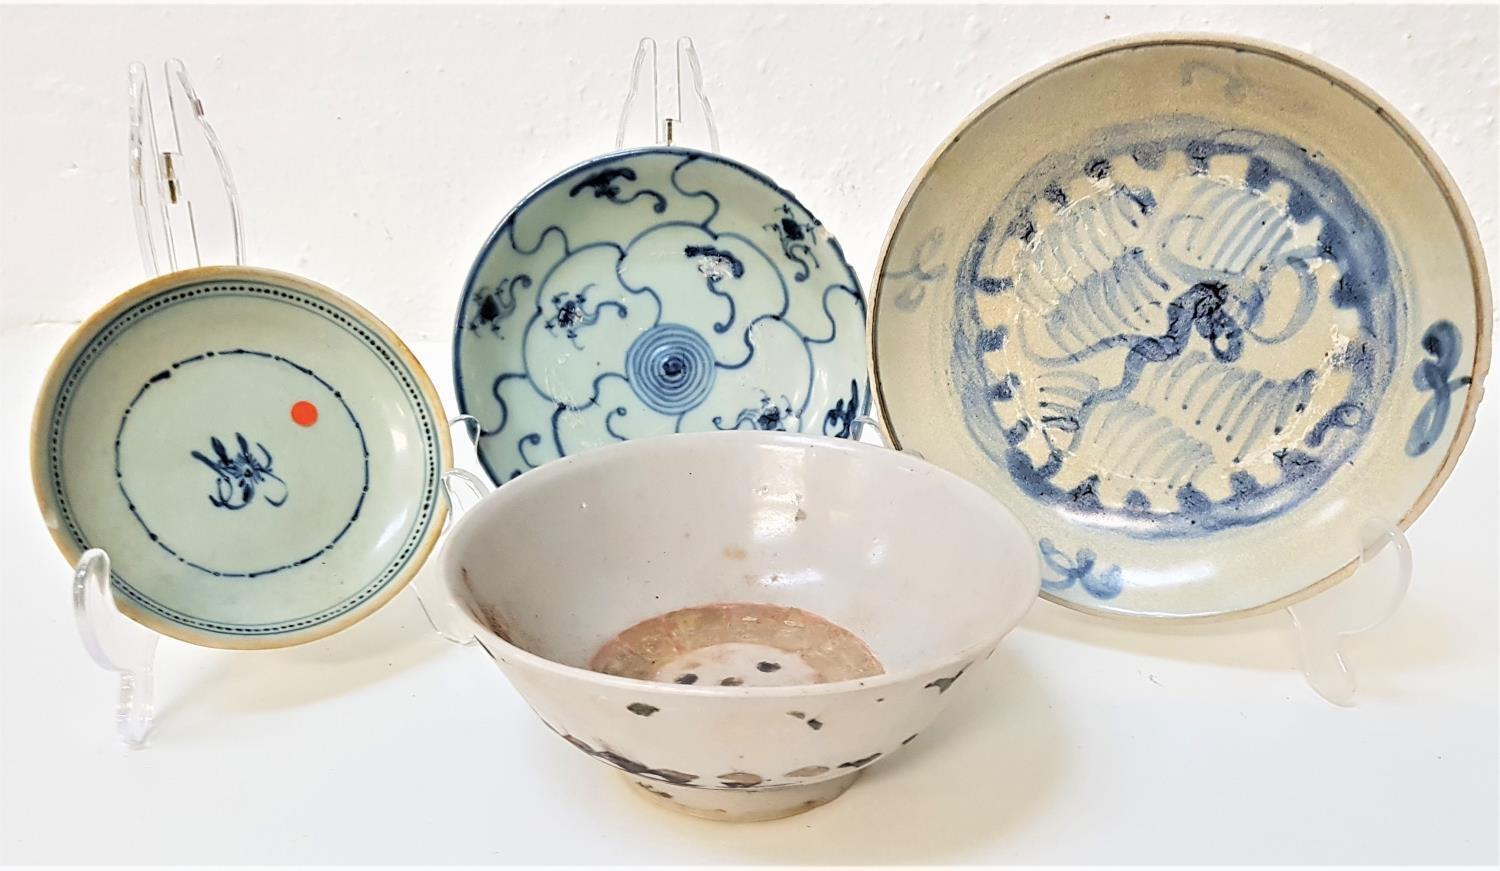 TEK SING PORCELAIN comprising a bowl and three varying size shallow bowls, with Nagel Auctions Tek